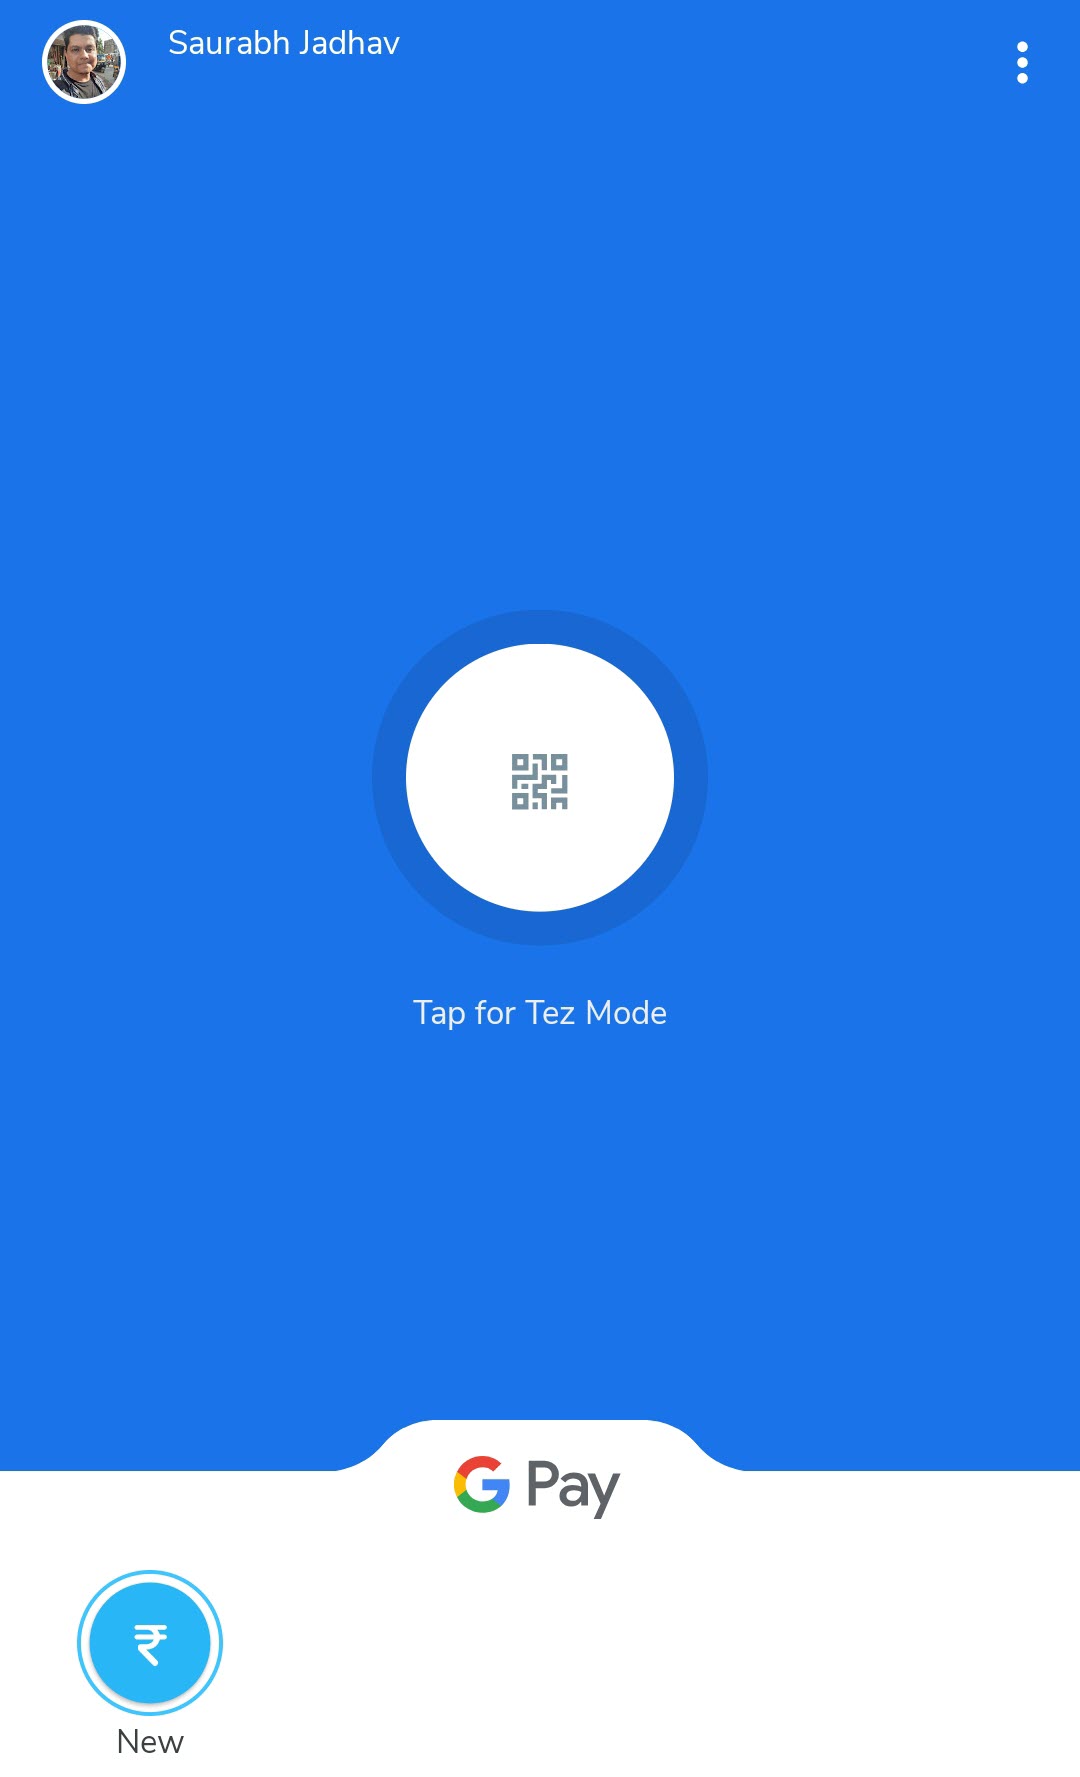 How to Make a Bank Transfer in Google Pay